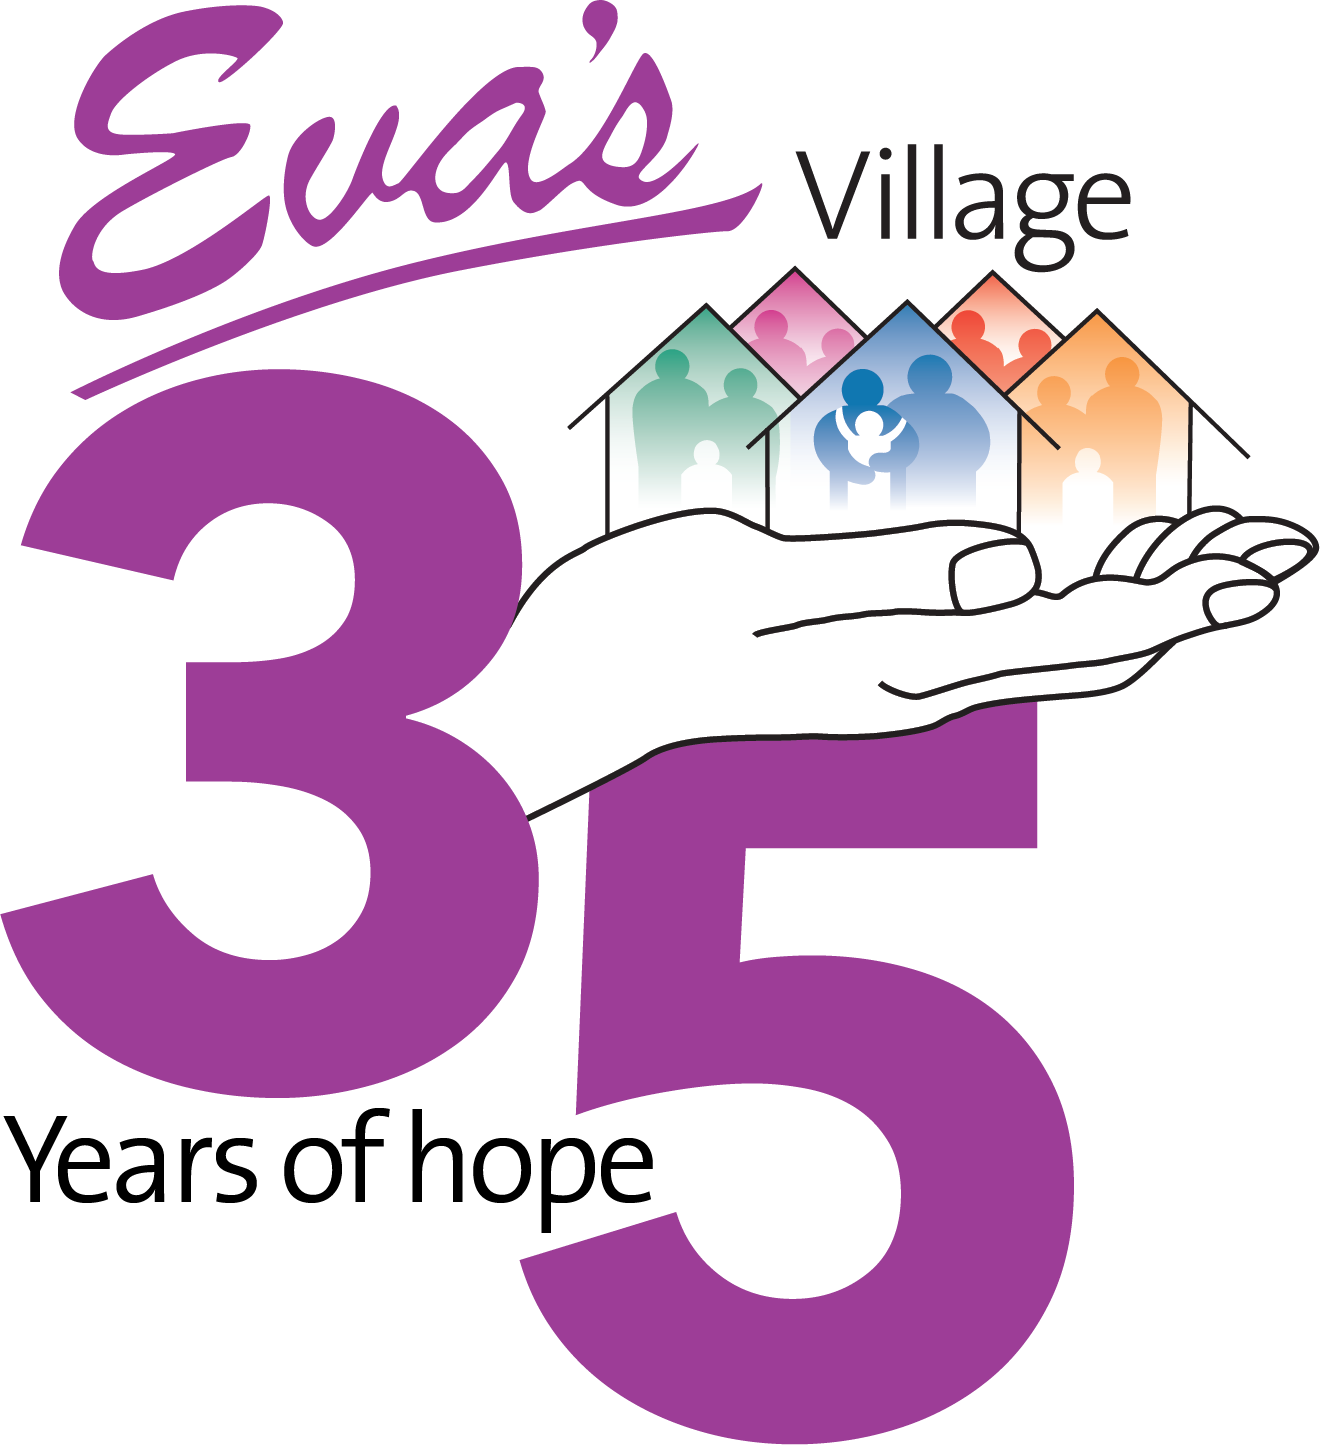 Eva’s Village mission is to feed the hungry, shelter the homeless, treat the addicted and provide medical and dental care to the poor with respect for the human dignity of each individual.